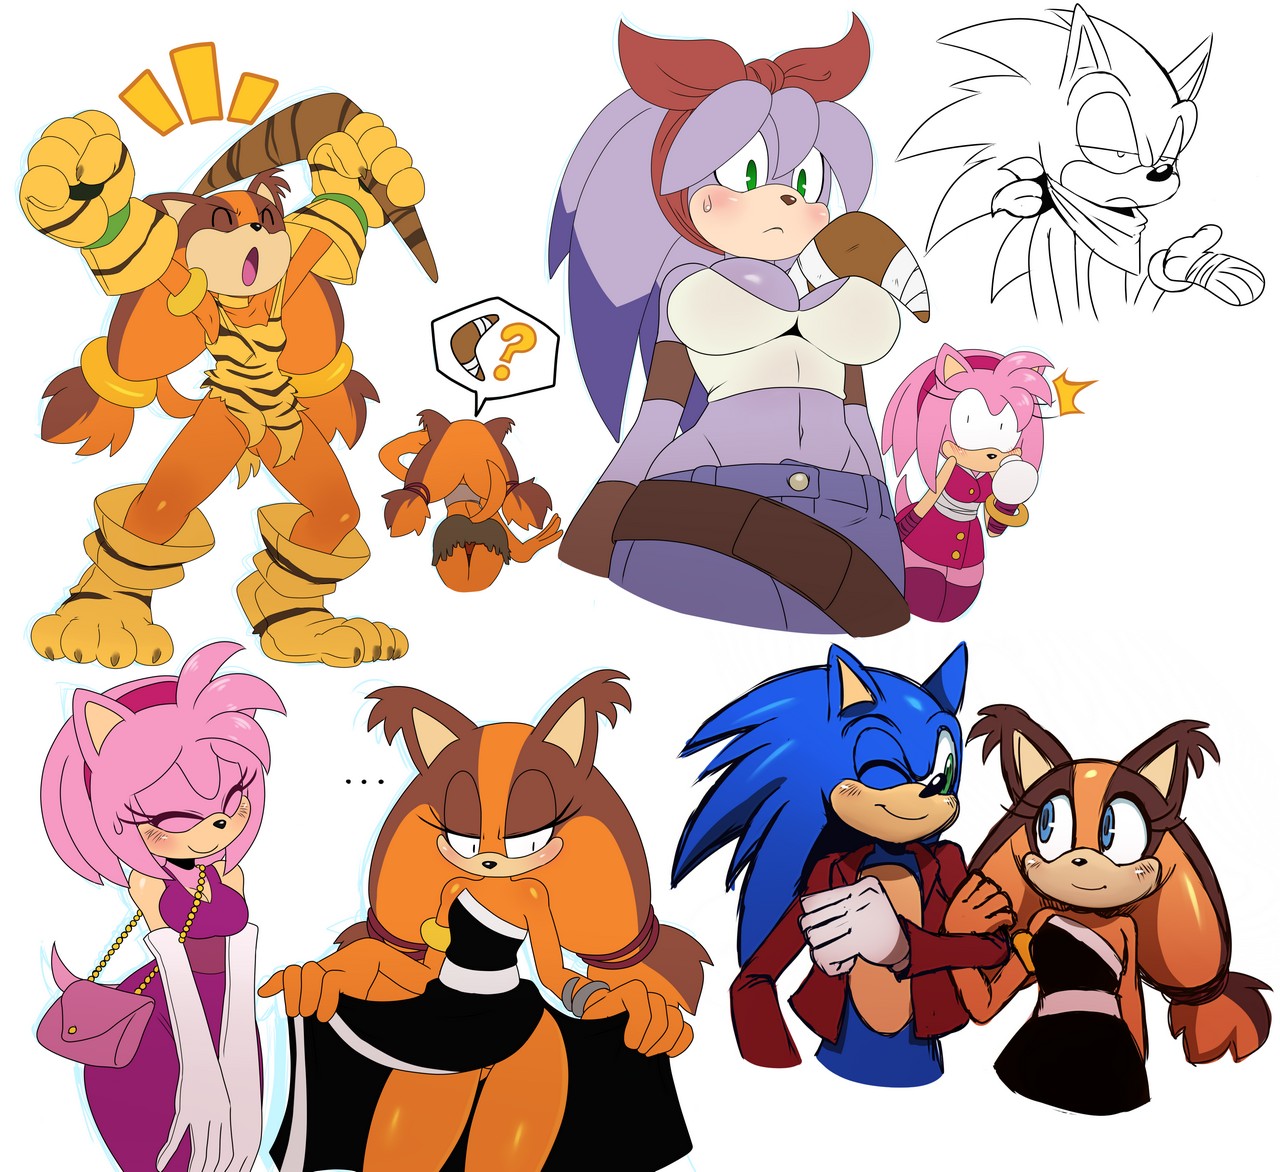 Amy Rose Cham Cham Perci The Bandicoot Sonic The Hedgehog Sticks The Jungle Badger By Sssonic